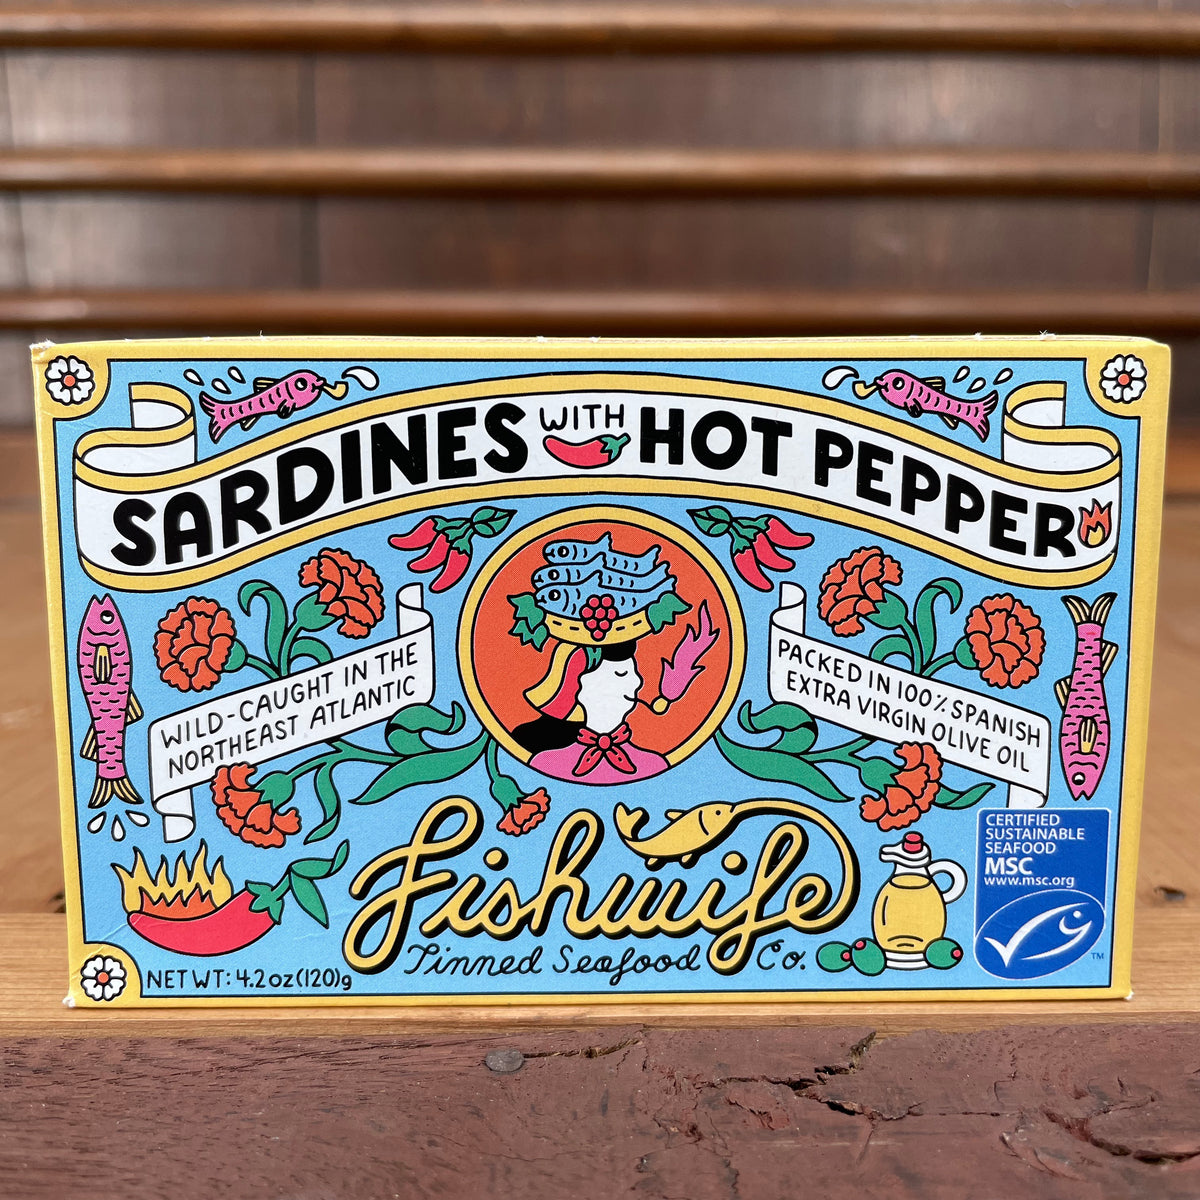 Fishwife Wild-Caught Sardines with Hot Pepper - 4.2oz